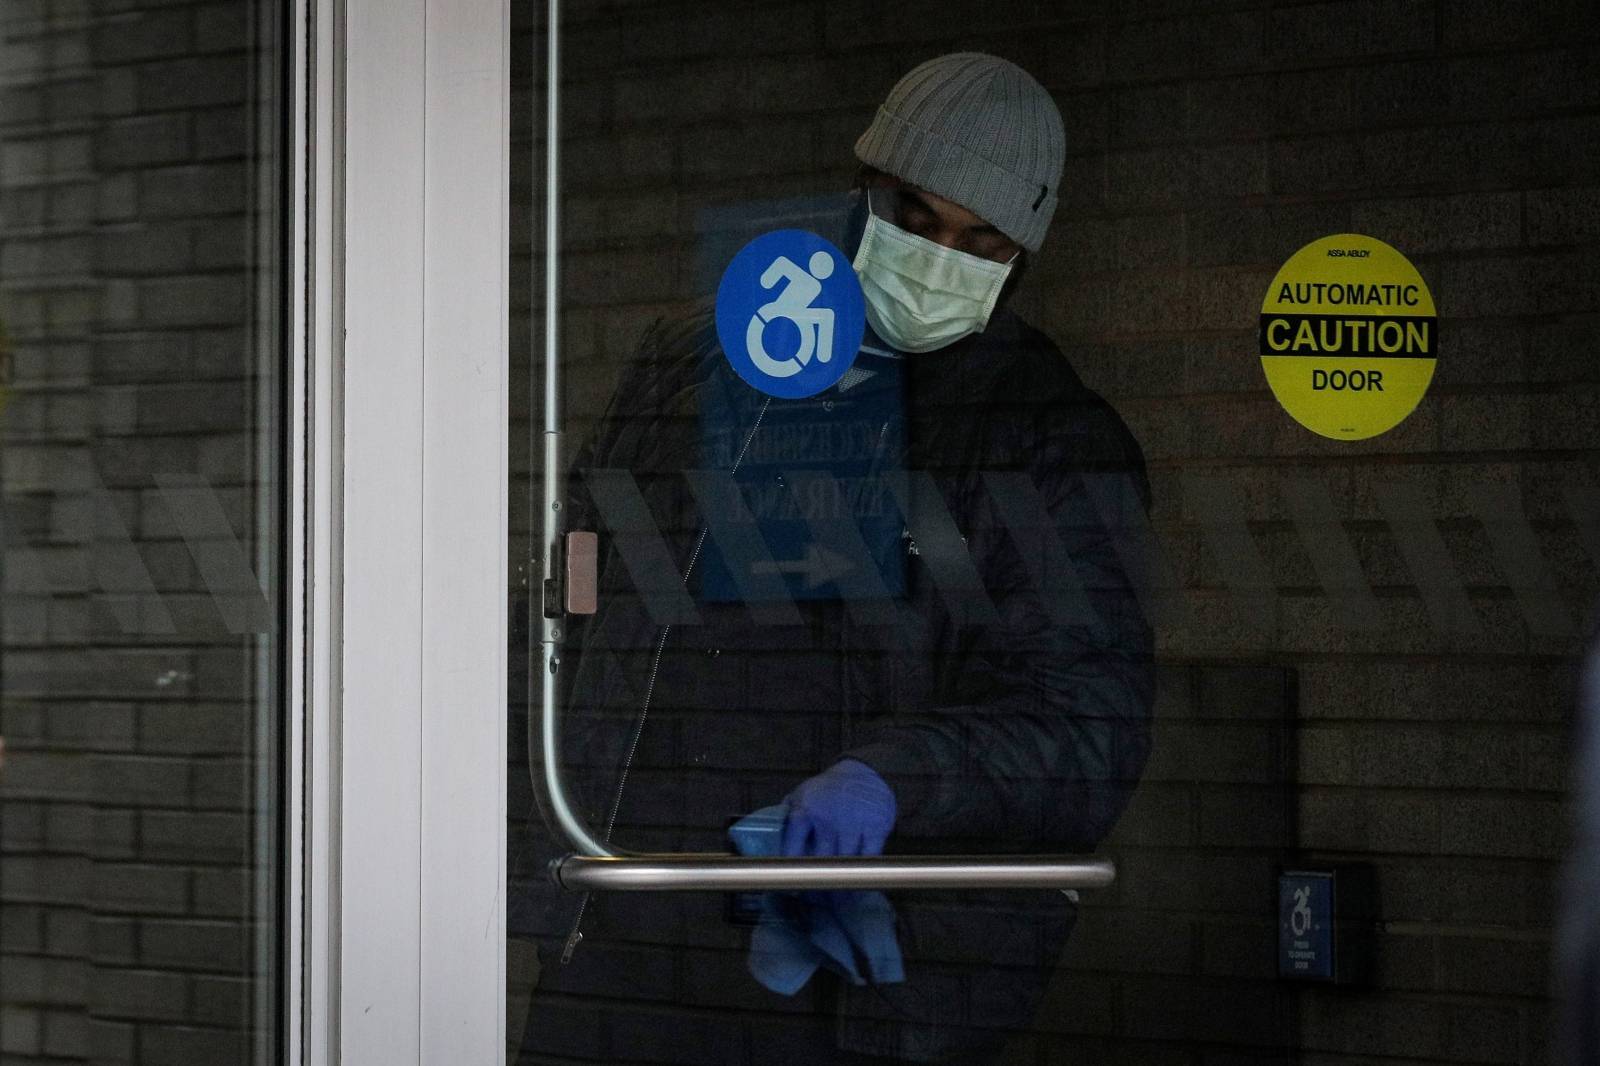 A member of the hospital staff cleans the door at Mount Sinai Hospital, during the outbreak coronavirus disease (COVID-19)  outbreak, in New York